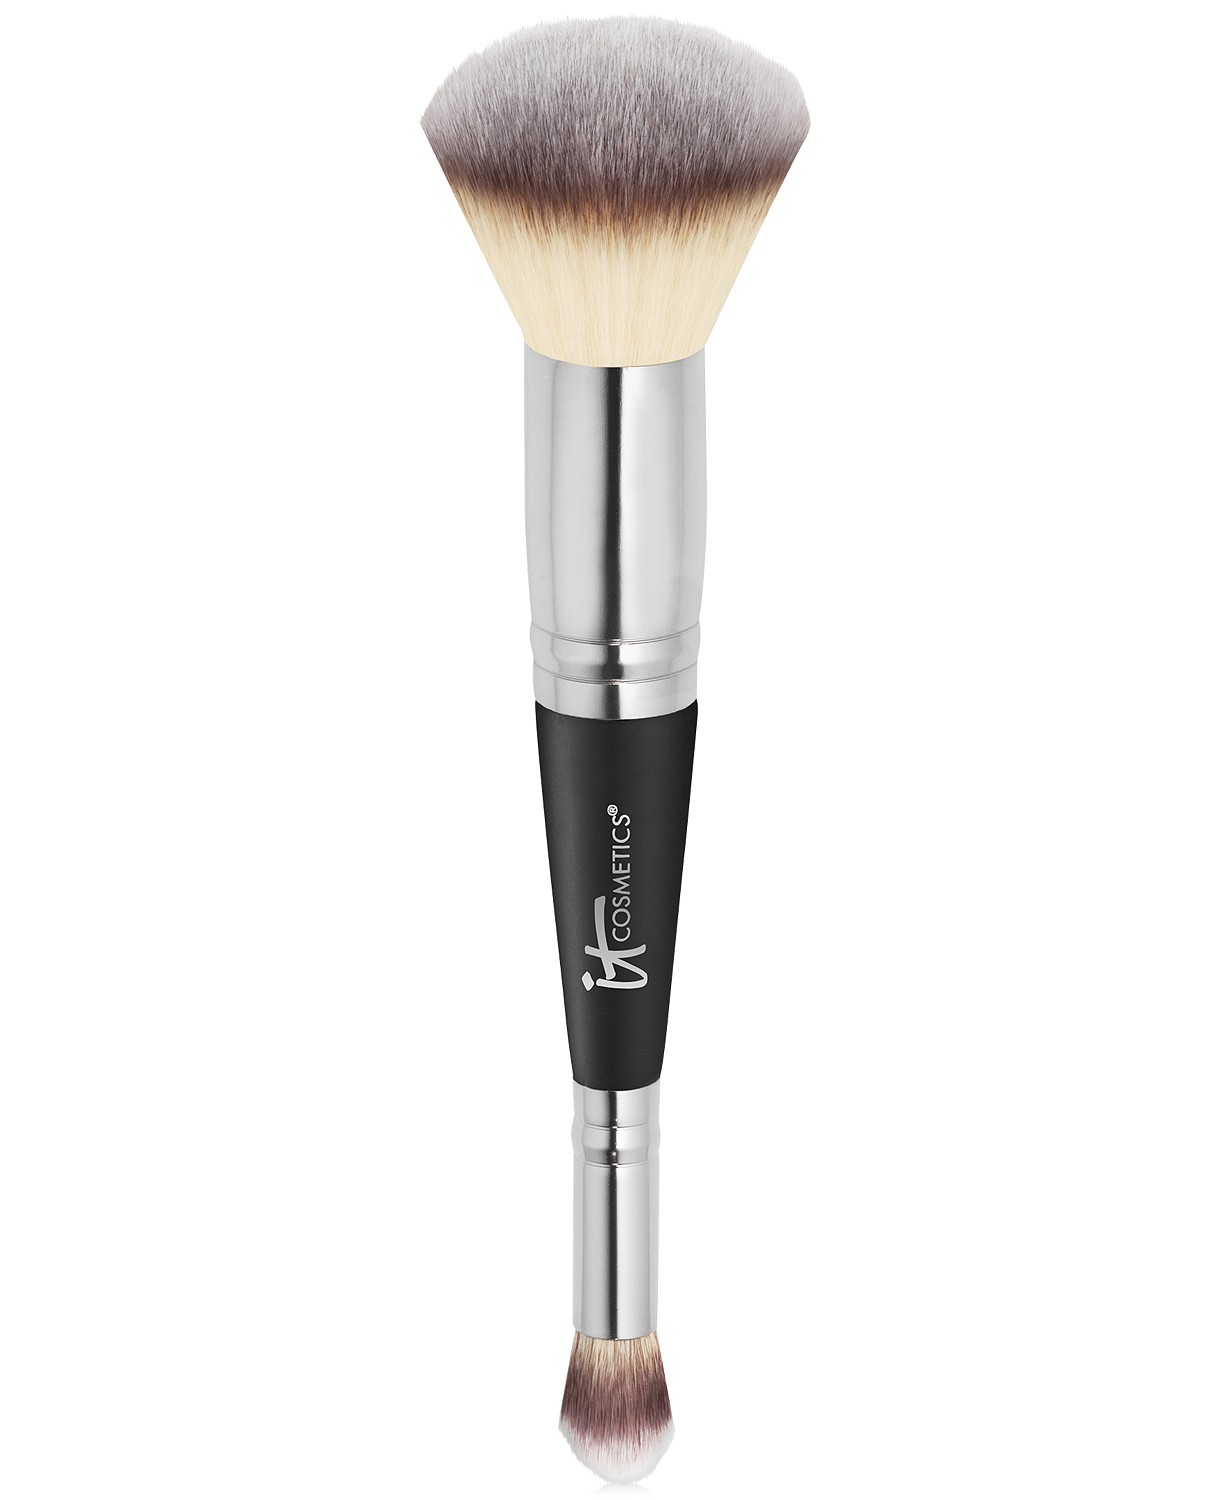 How to clean makeup brushes: IT Cosmetics Heavenly Lux Complexion Perfection Brush #7